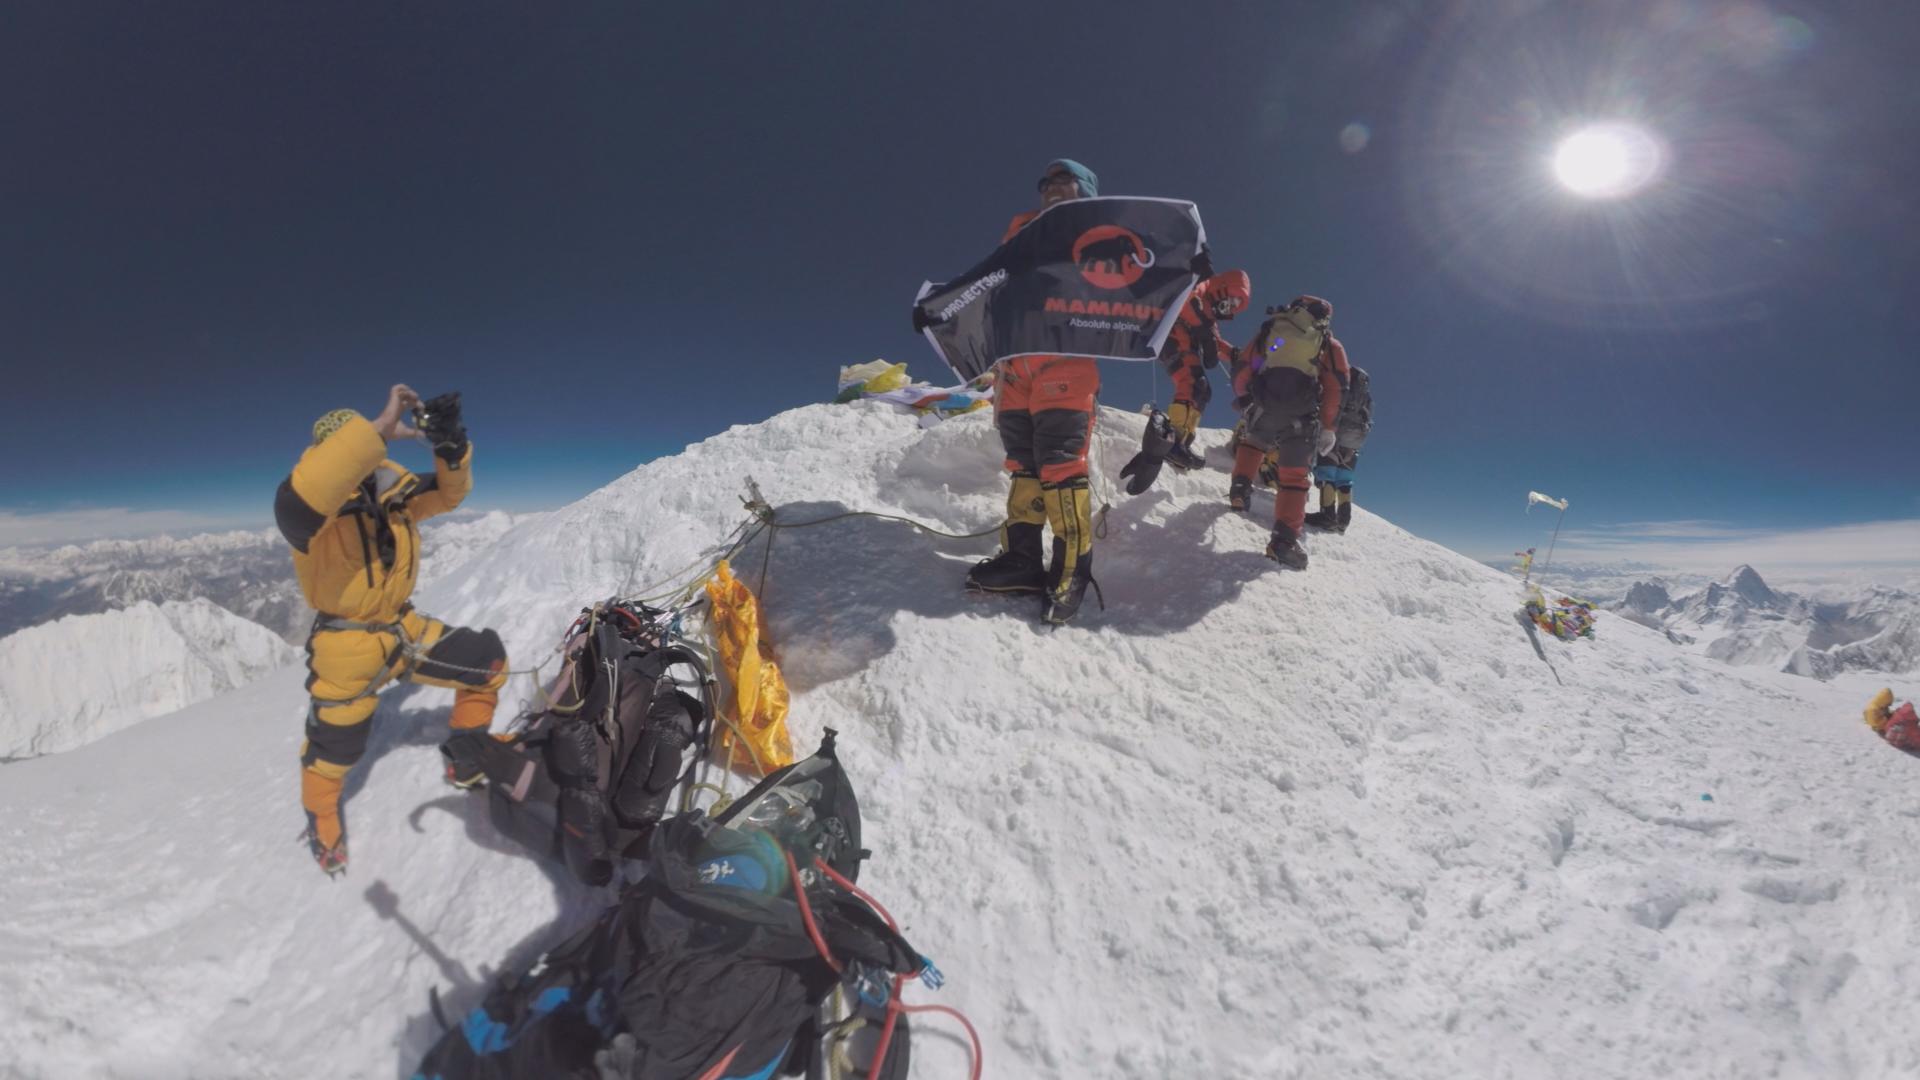 #project360 - Mount Everest - Highlight